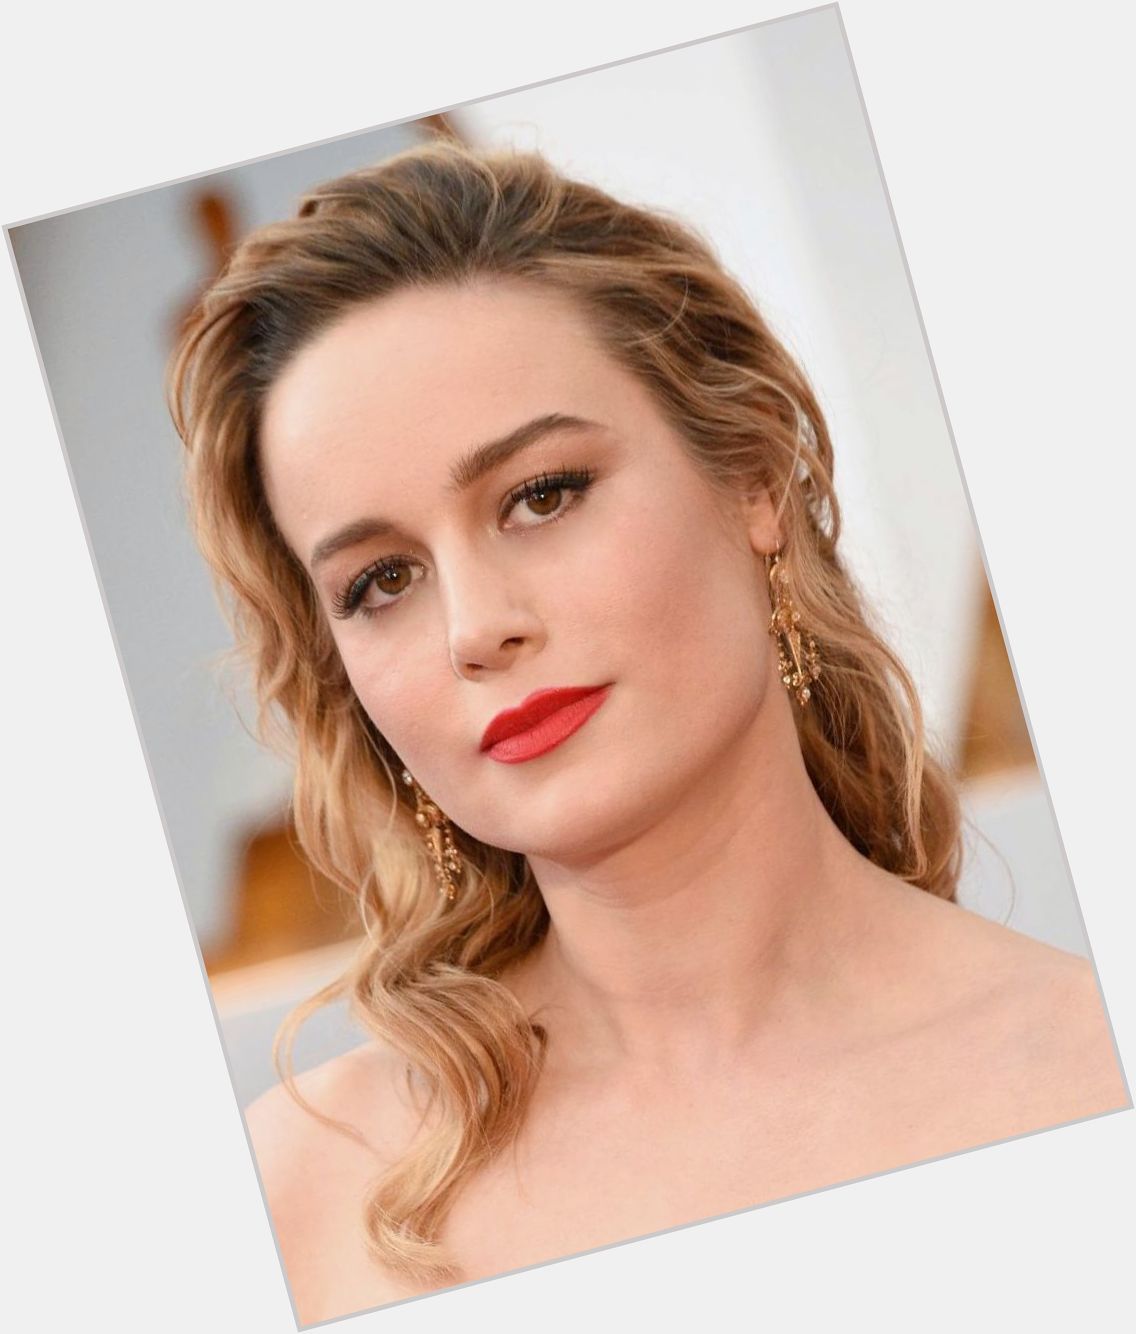 Brie Larson October 1 Sending Very Happy Birthday Wishes! All the Best! 